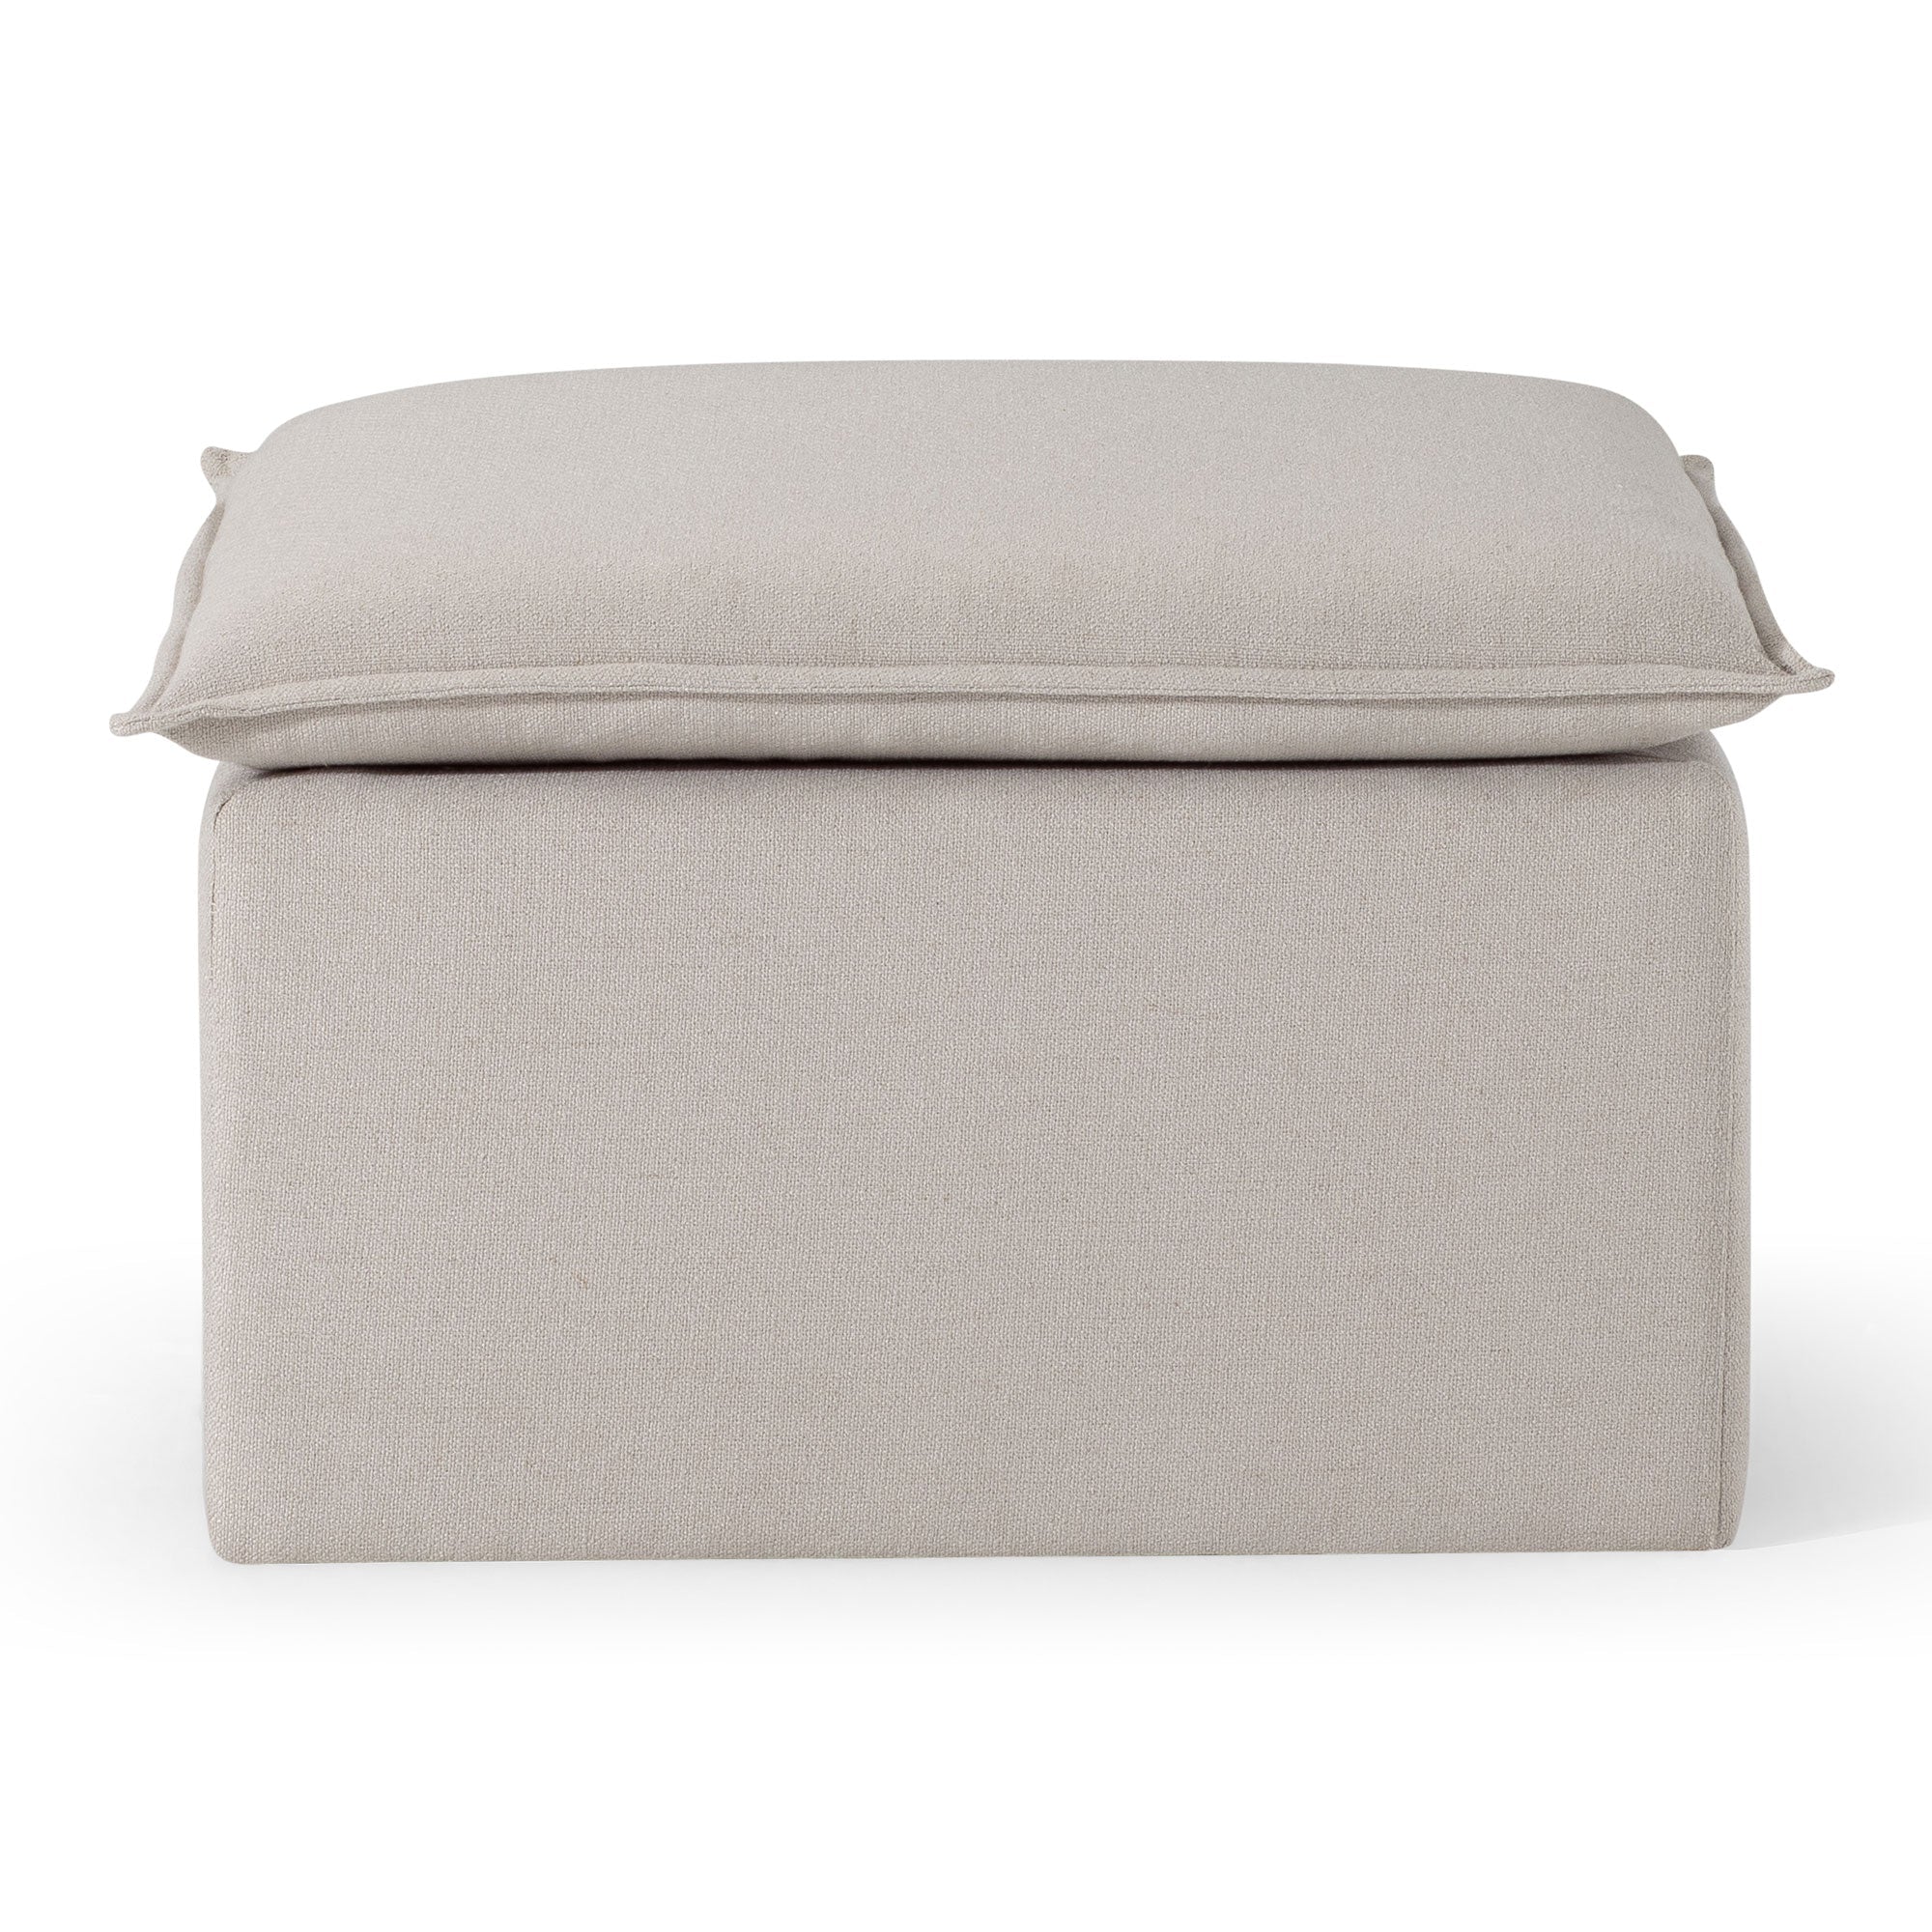 Claude Organic Ottoman in Dove Fabric Upholstery in Ottomans & Benches by Maven Lane